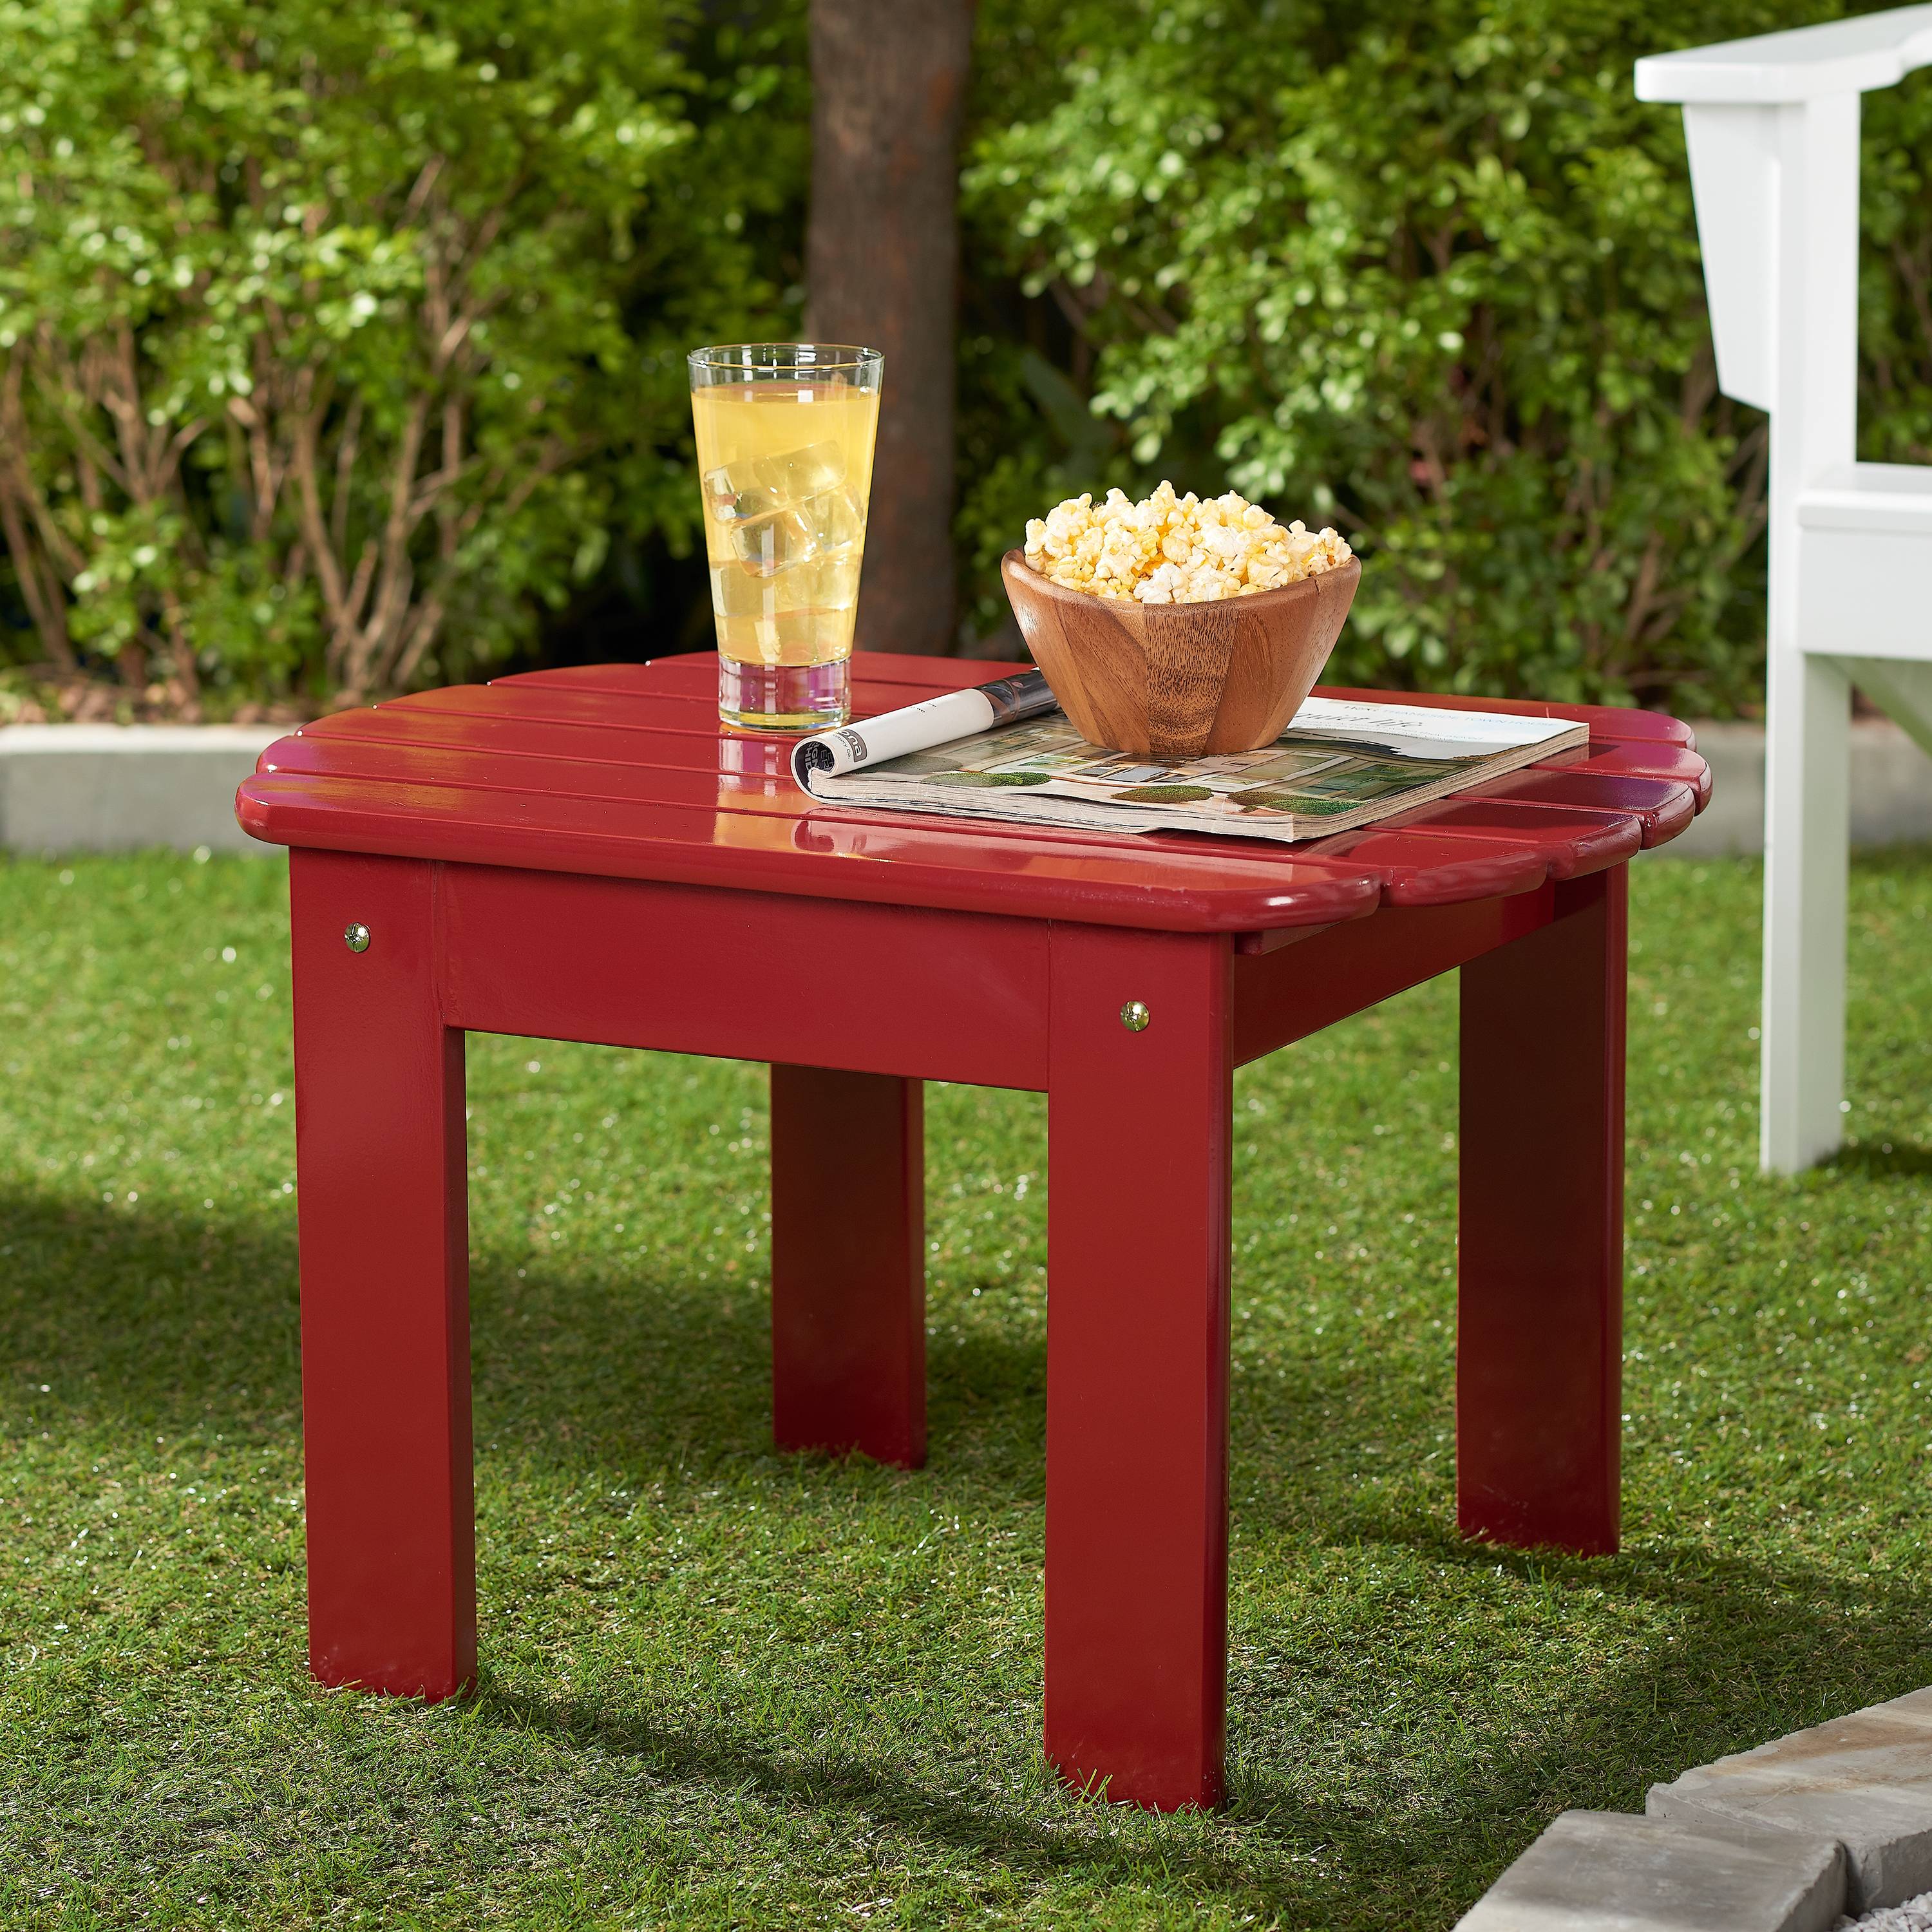 Mainstays Wood Adirondack Outdoor Side Table, Red - image 3 of 6